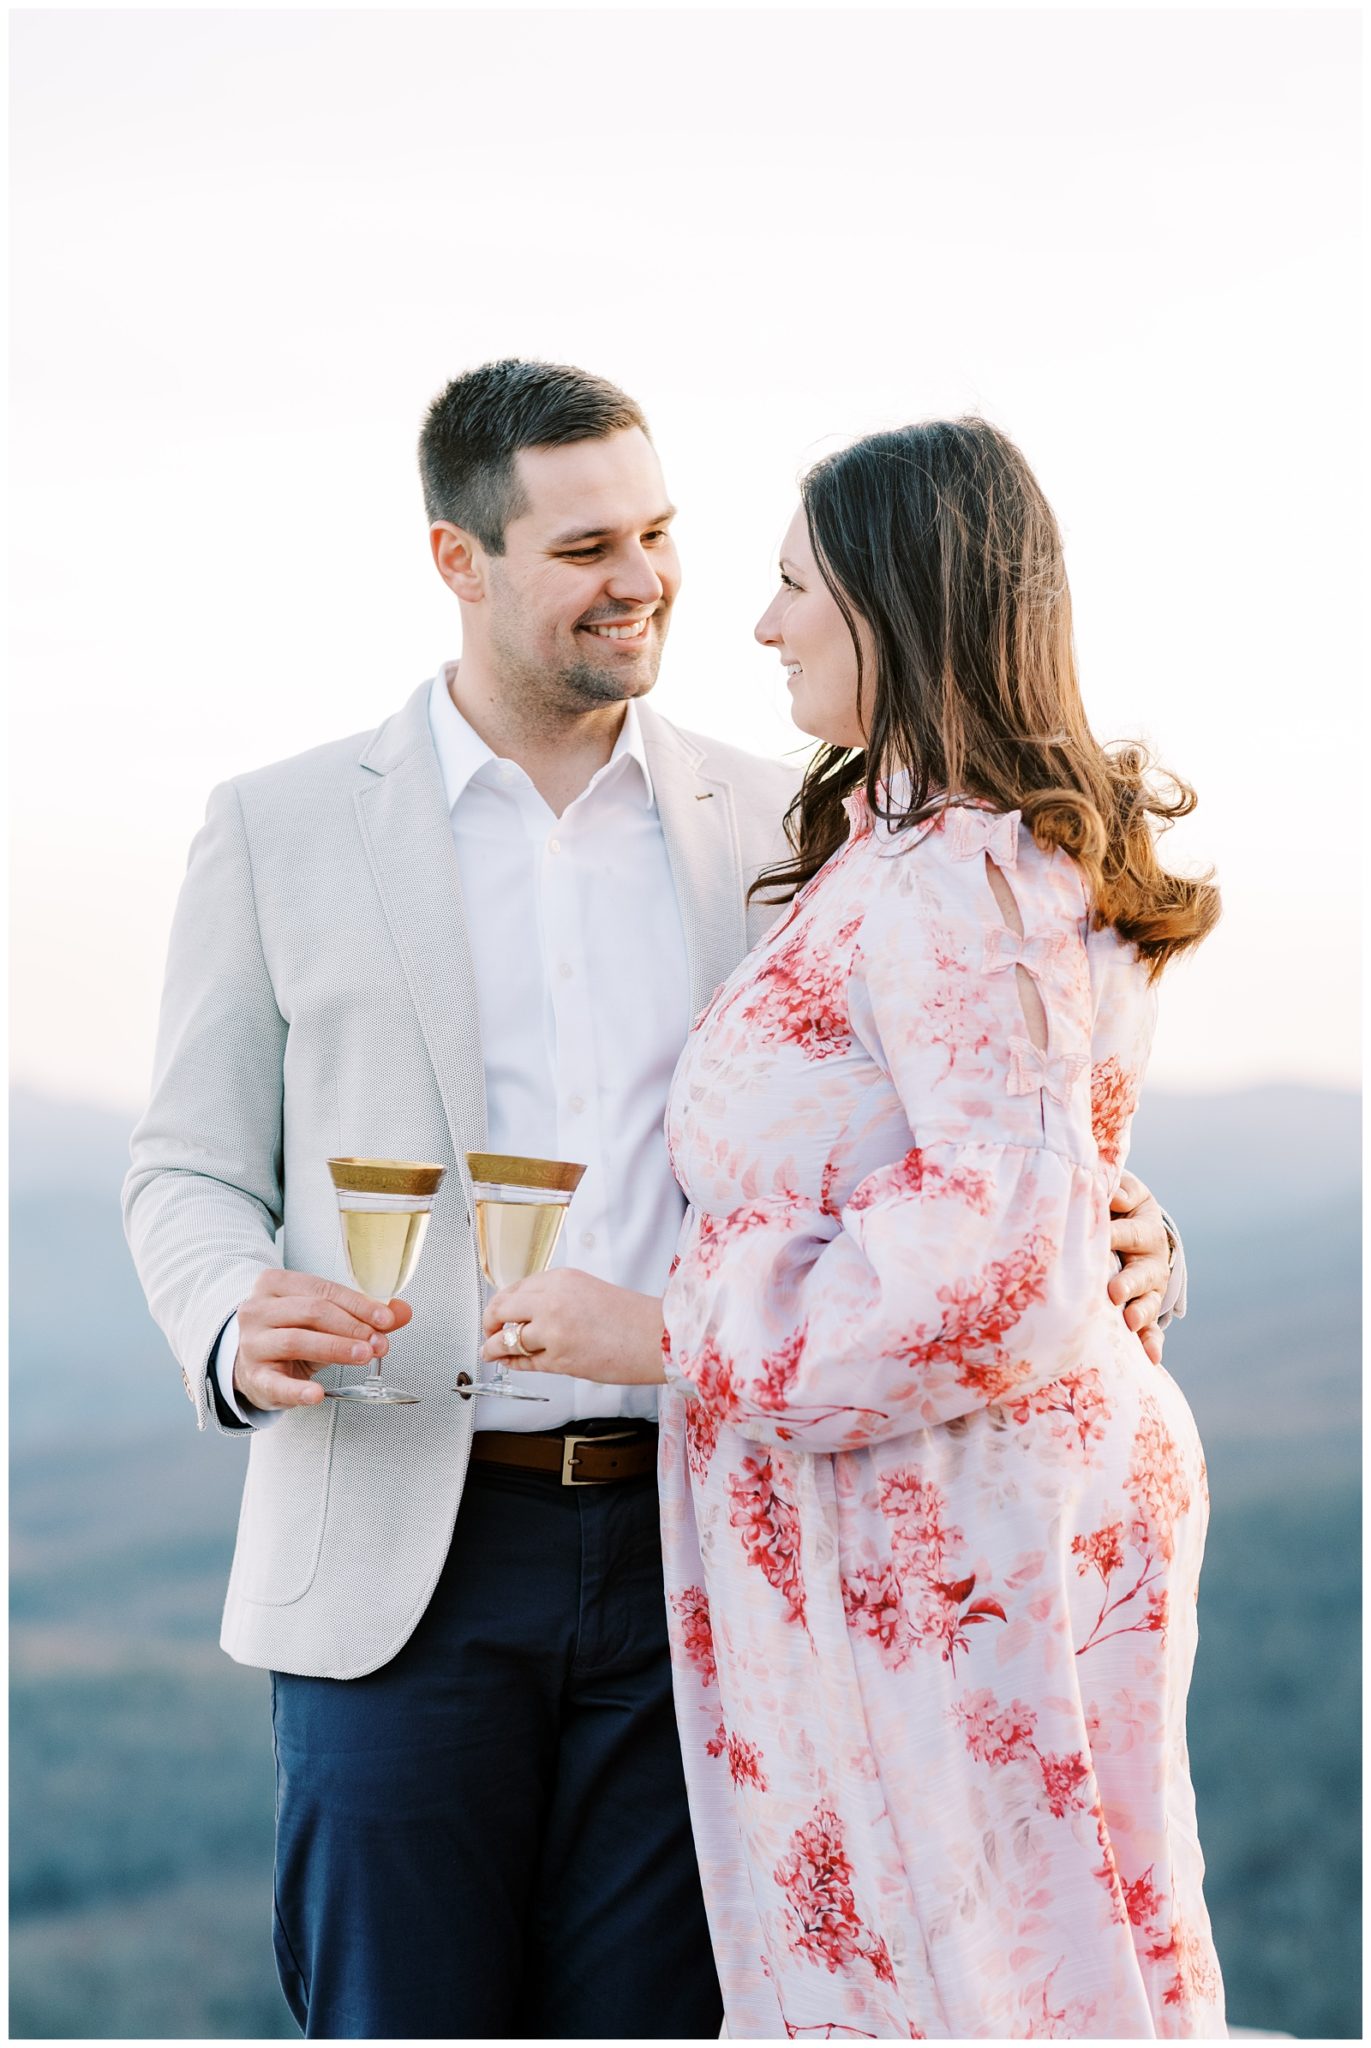 Popping champagne during engagement photos